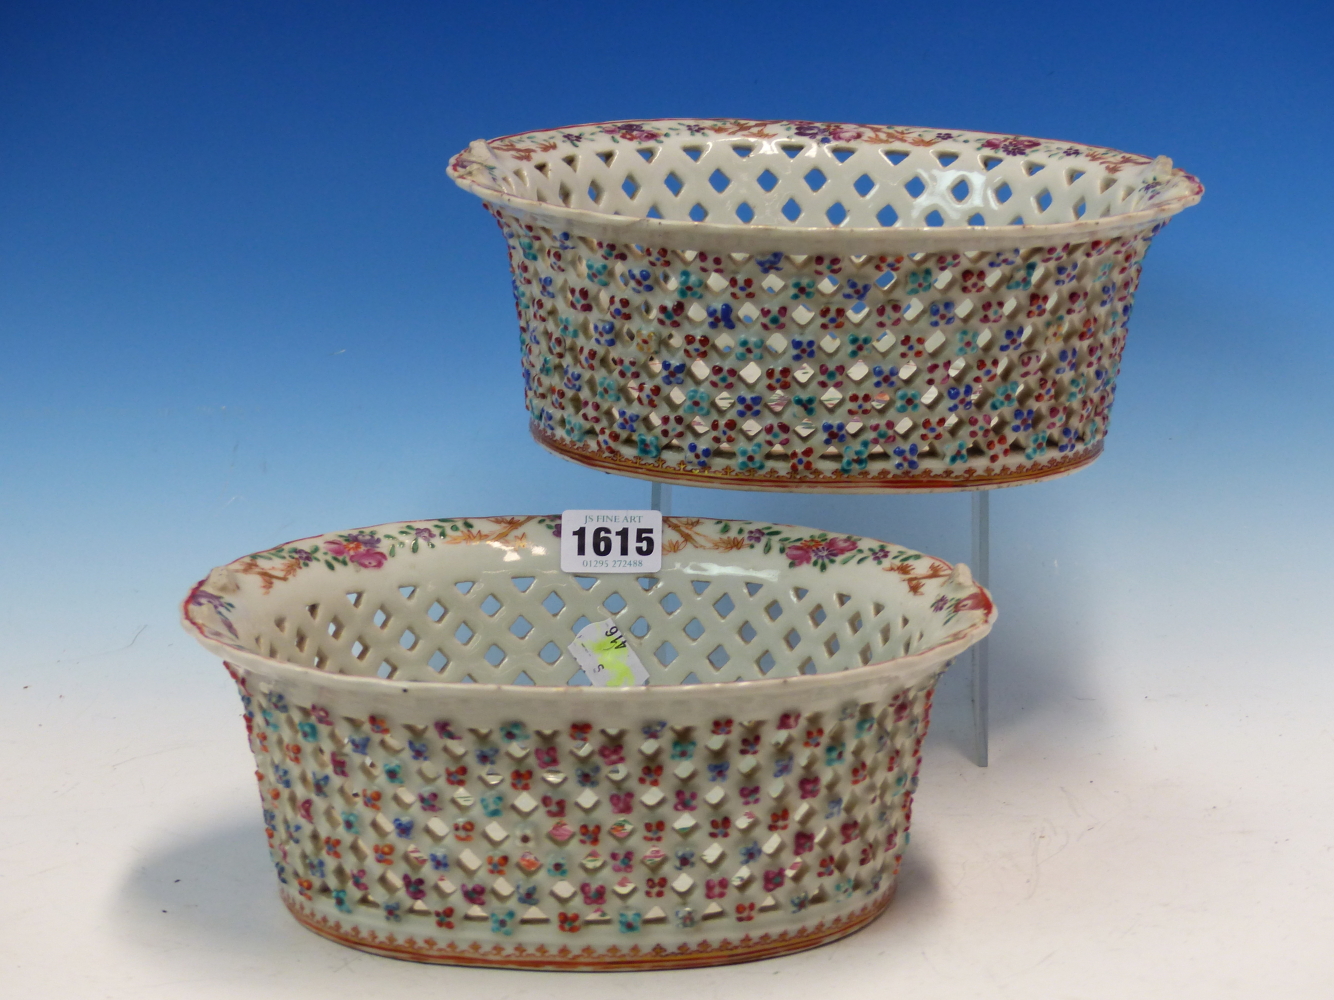 A PAIR OF CHINESE EXPORT BASKETS, THE WAVY RIMS GILT WITH BAMBOO ALTERNATING WITH FAMILLE ROSE